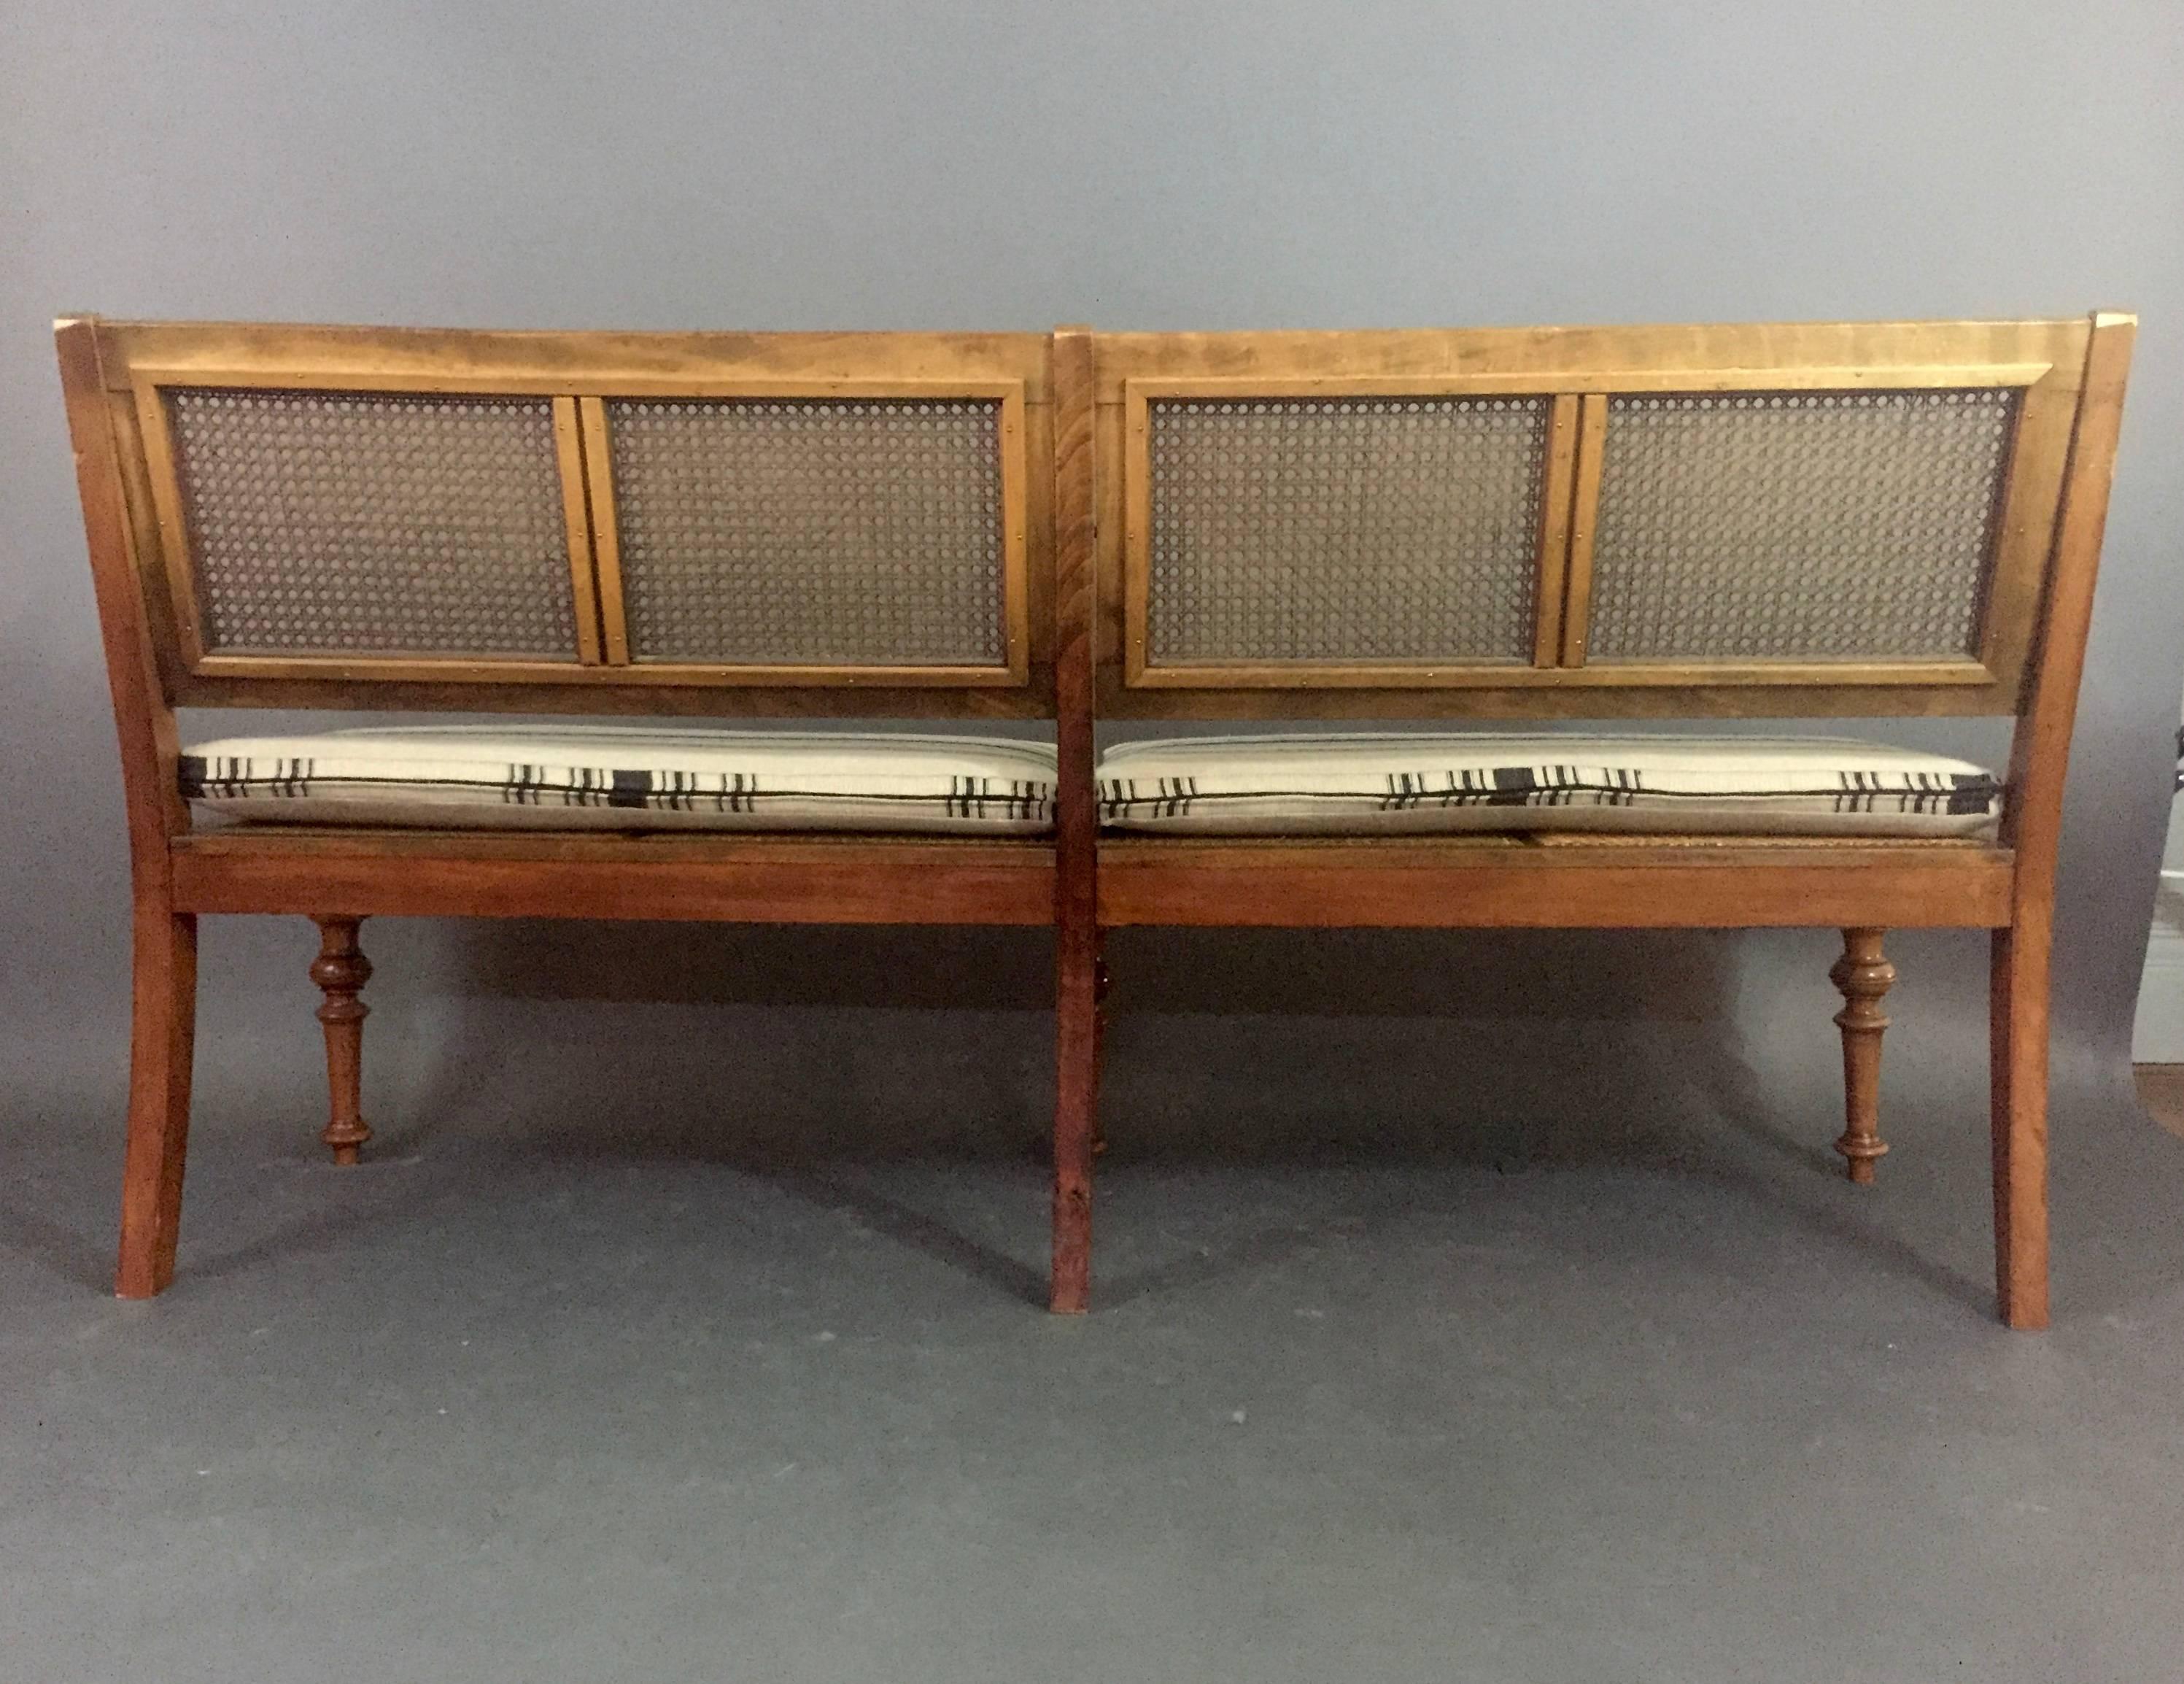 Art Nouveau Beechwood Long Bench with French Caning, Linen Covers, circa 1915 For Sale